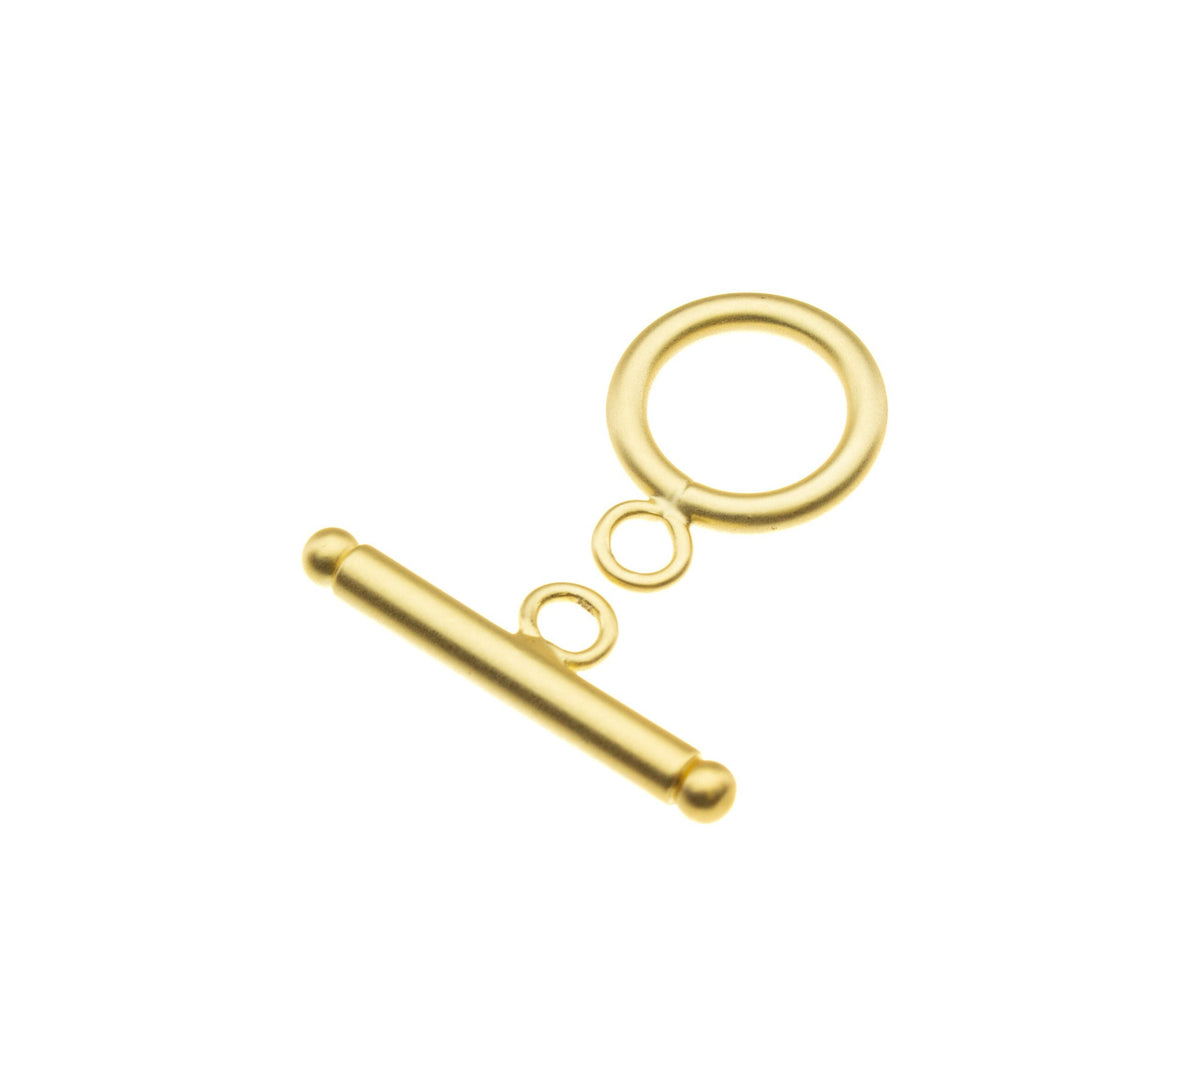 Matte Finish Toggle Clasp,Gold Circle Toggle Clasp,Round Toggle Clasp For Jewelry,CLG002